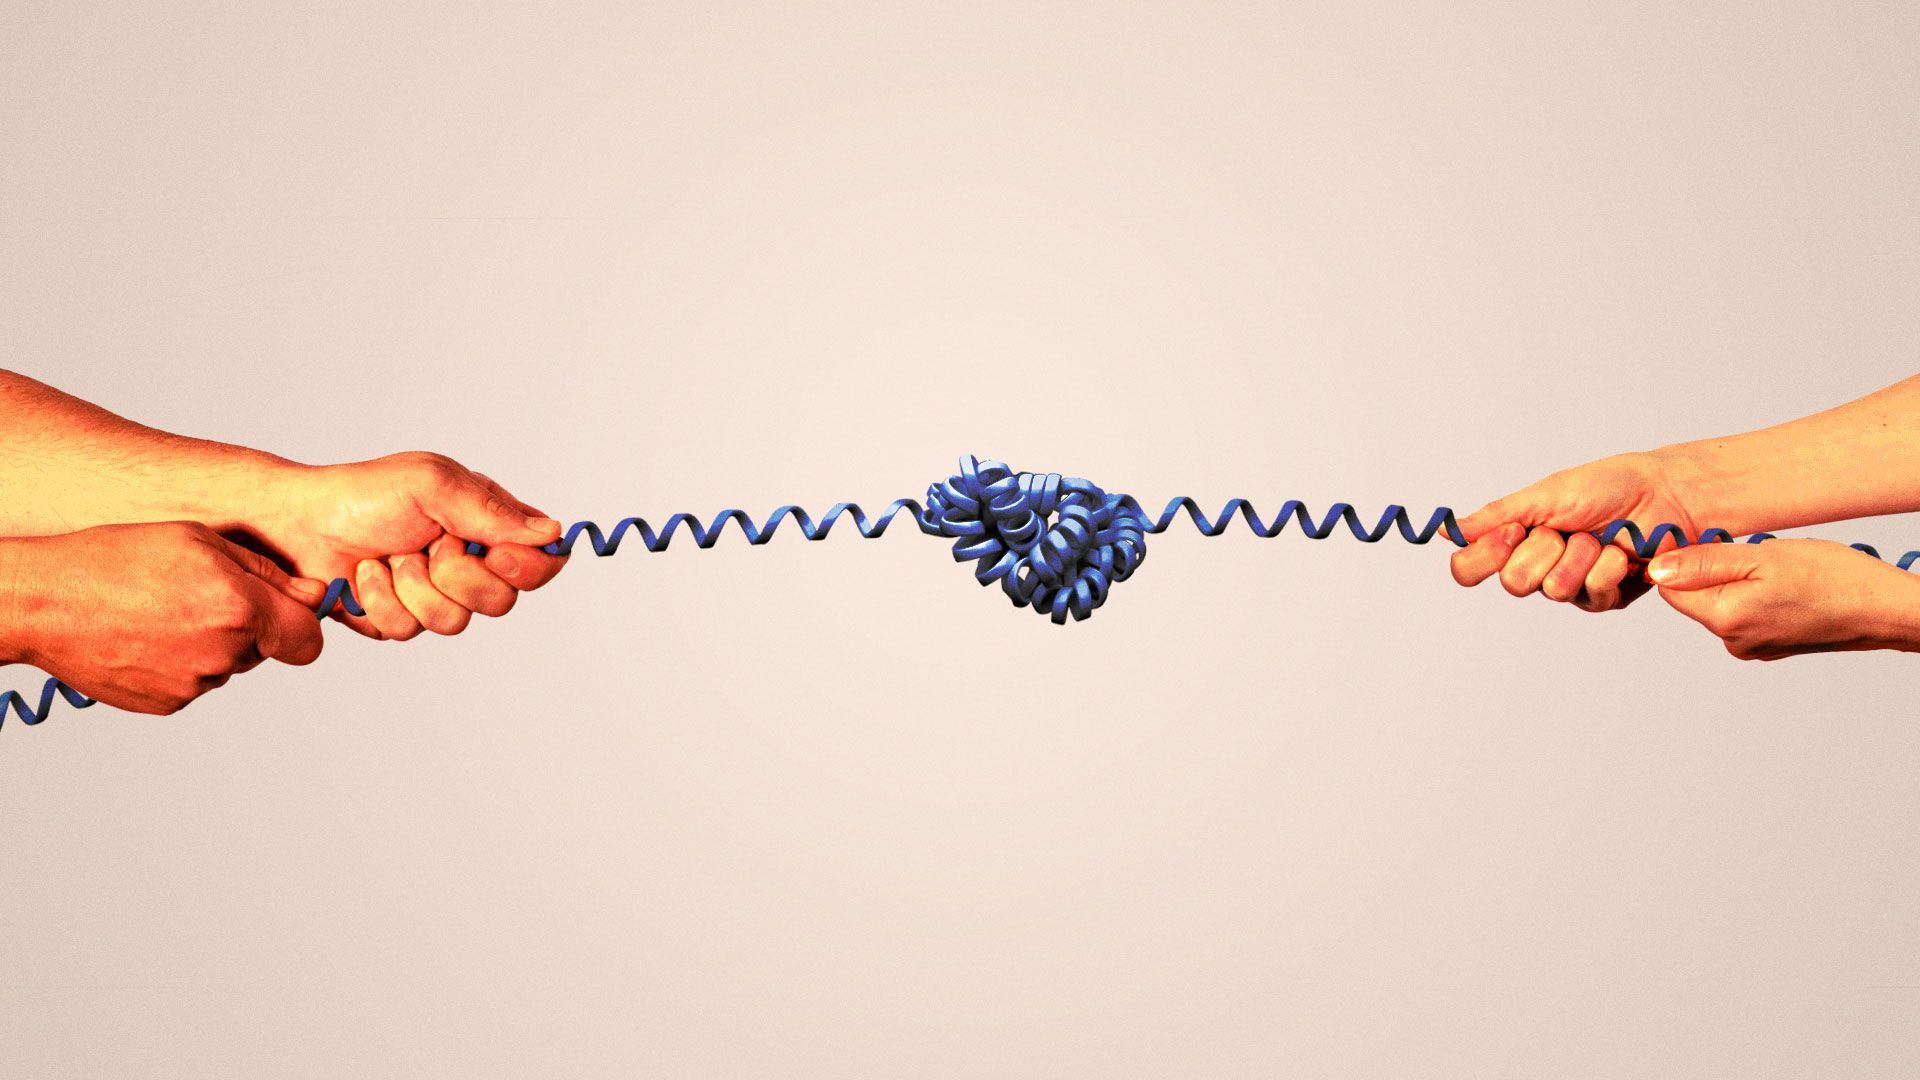 Illustration of hands in a tug of war with a tangled phone cord